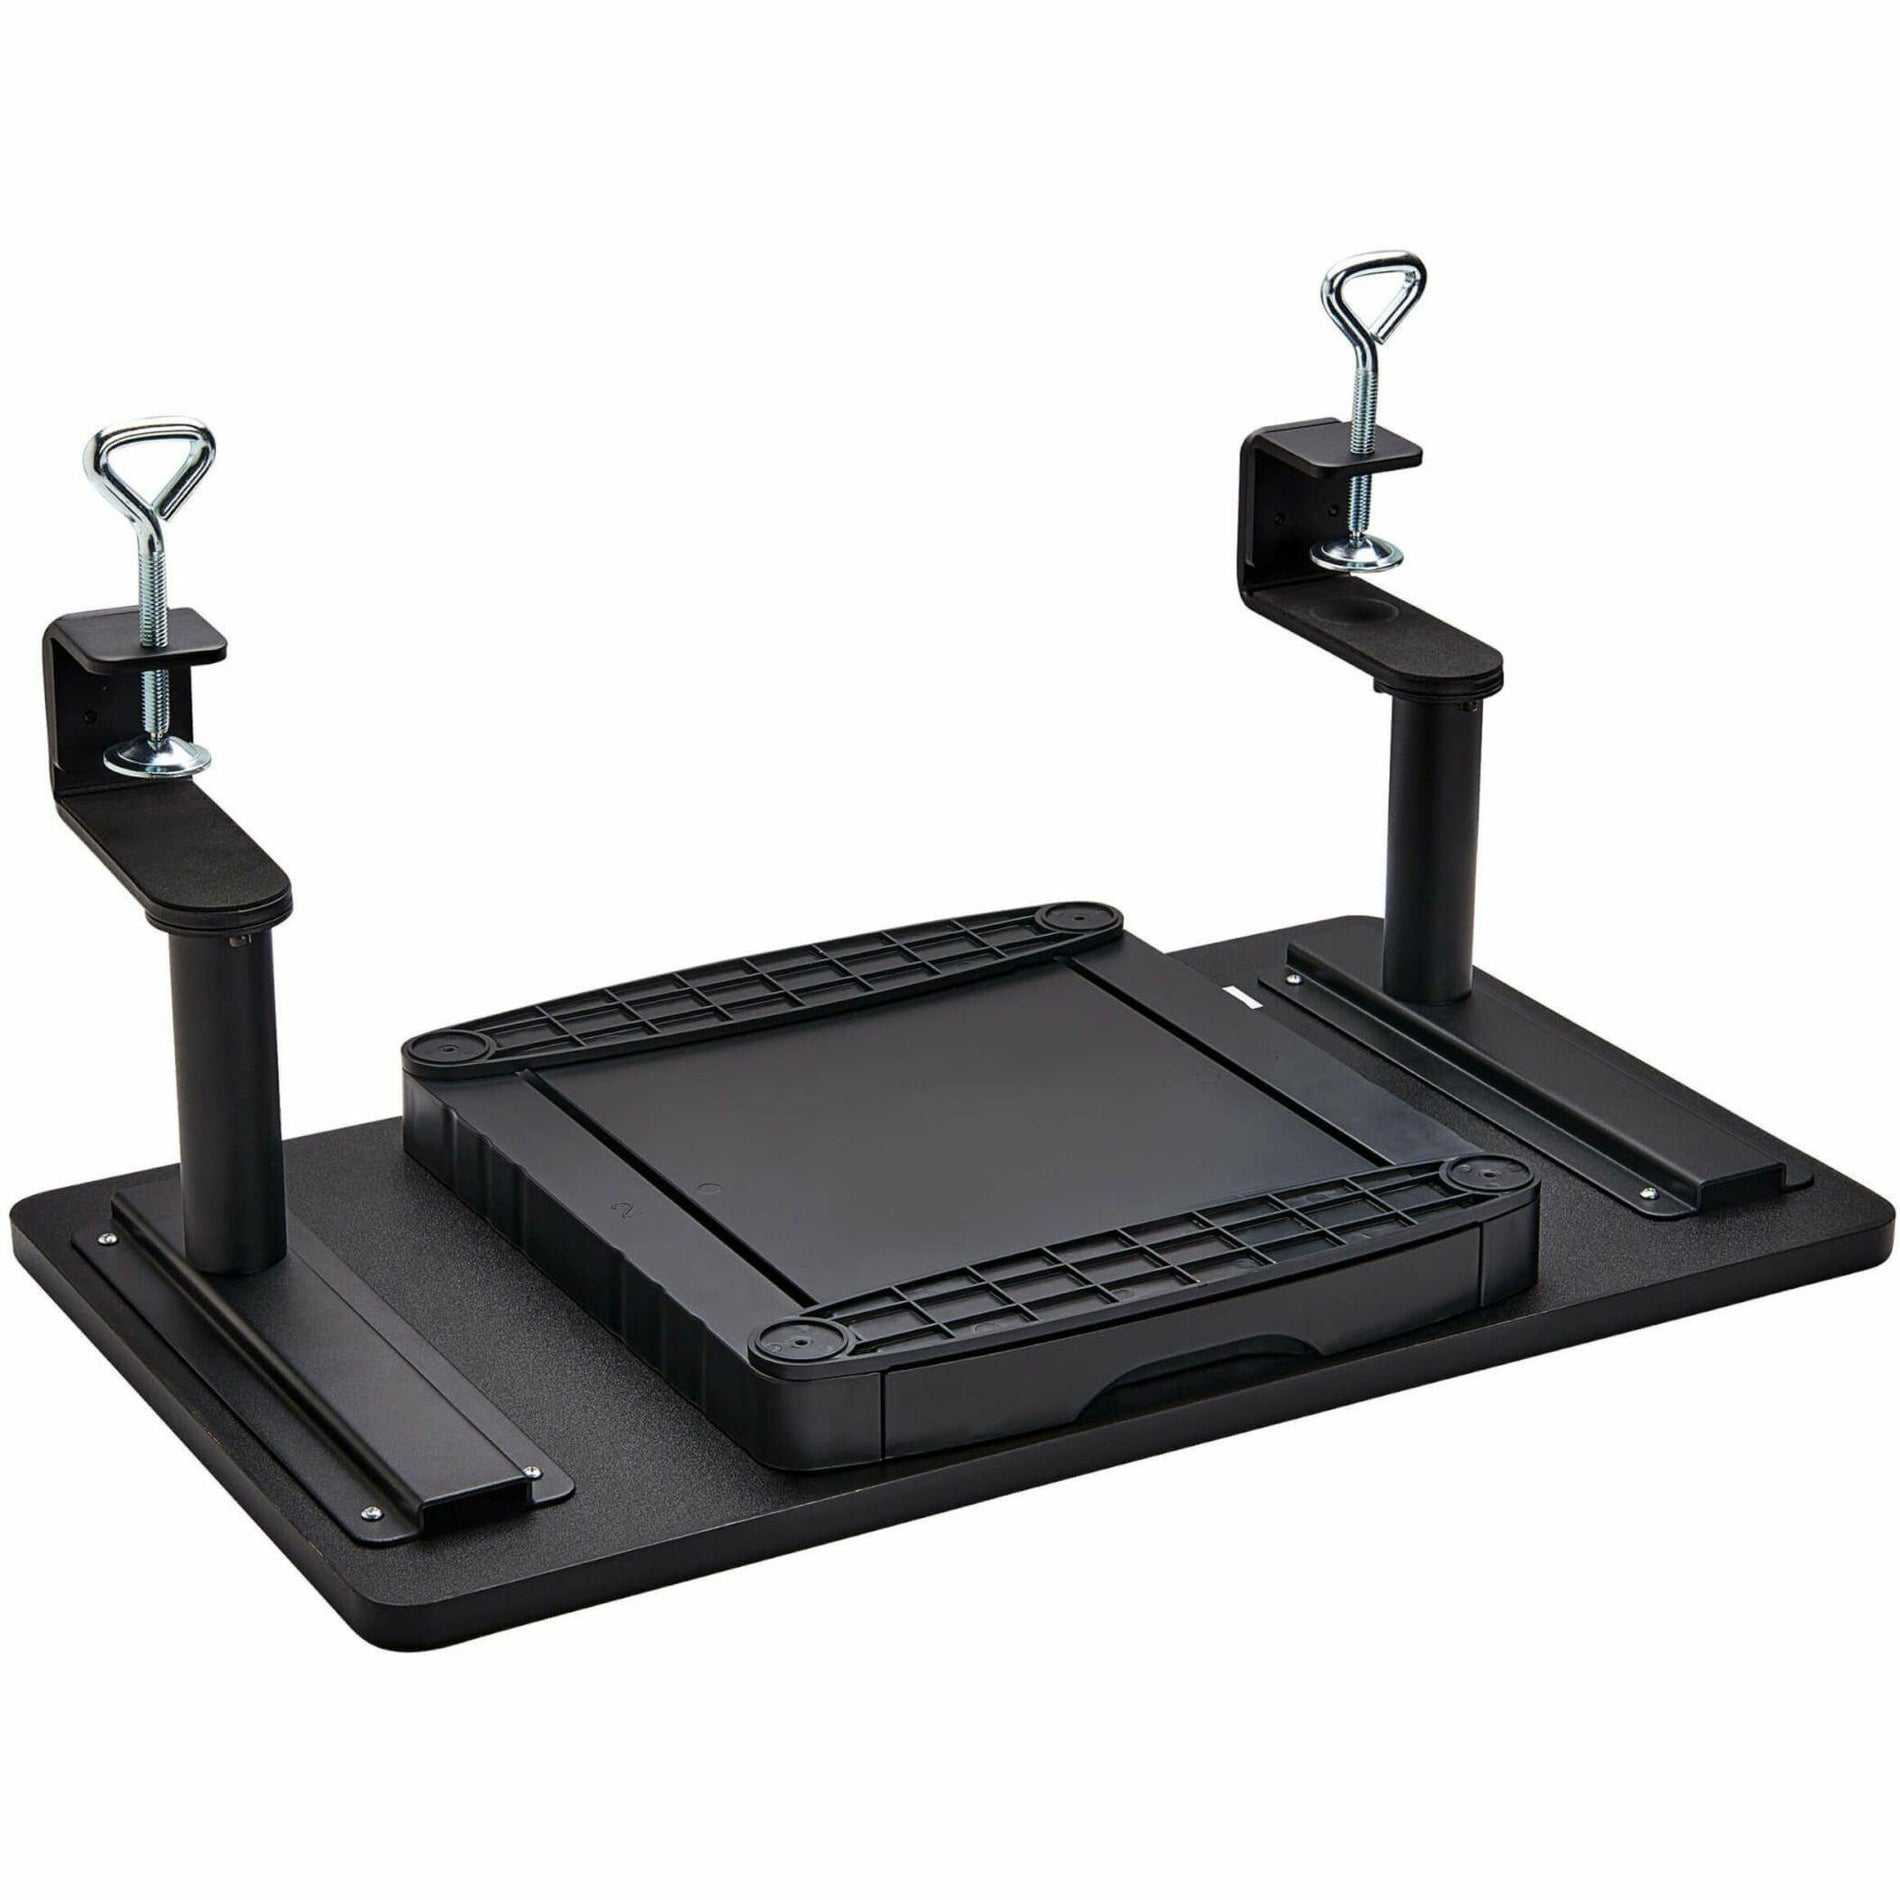 Tripp Lite WWSSC2414TAA Desk-Clamp Monitor Riser with Storage Drawer, TAA Compliant, 5 Year Warranty, RoHS Certified